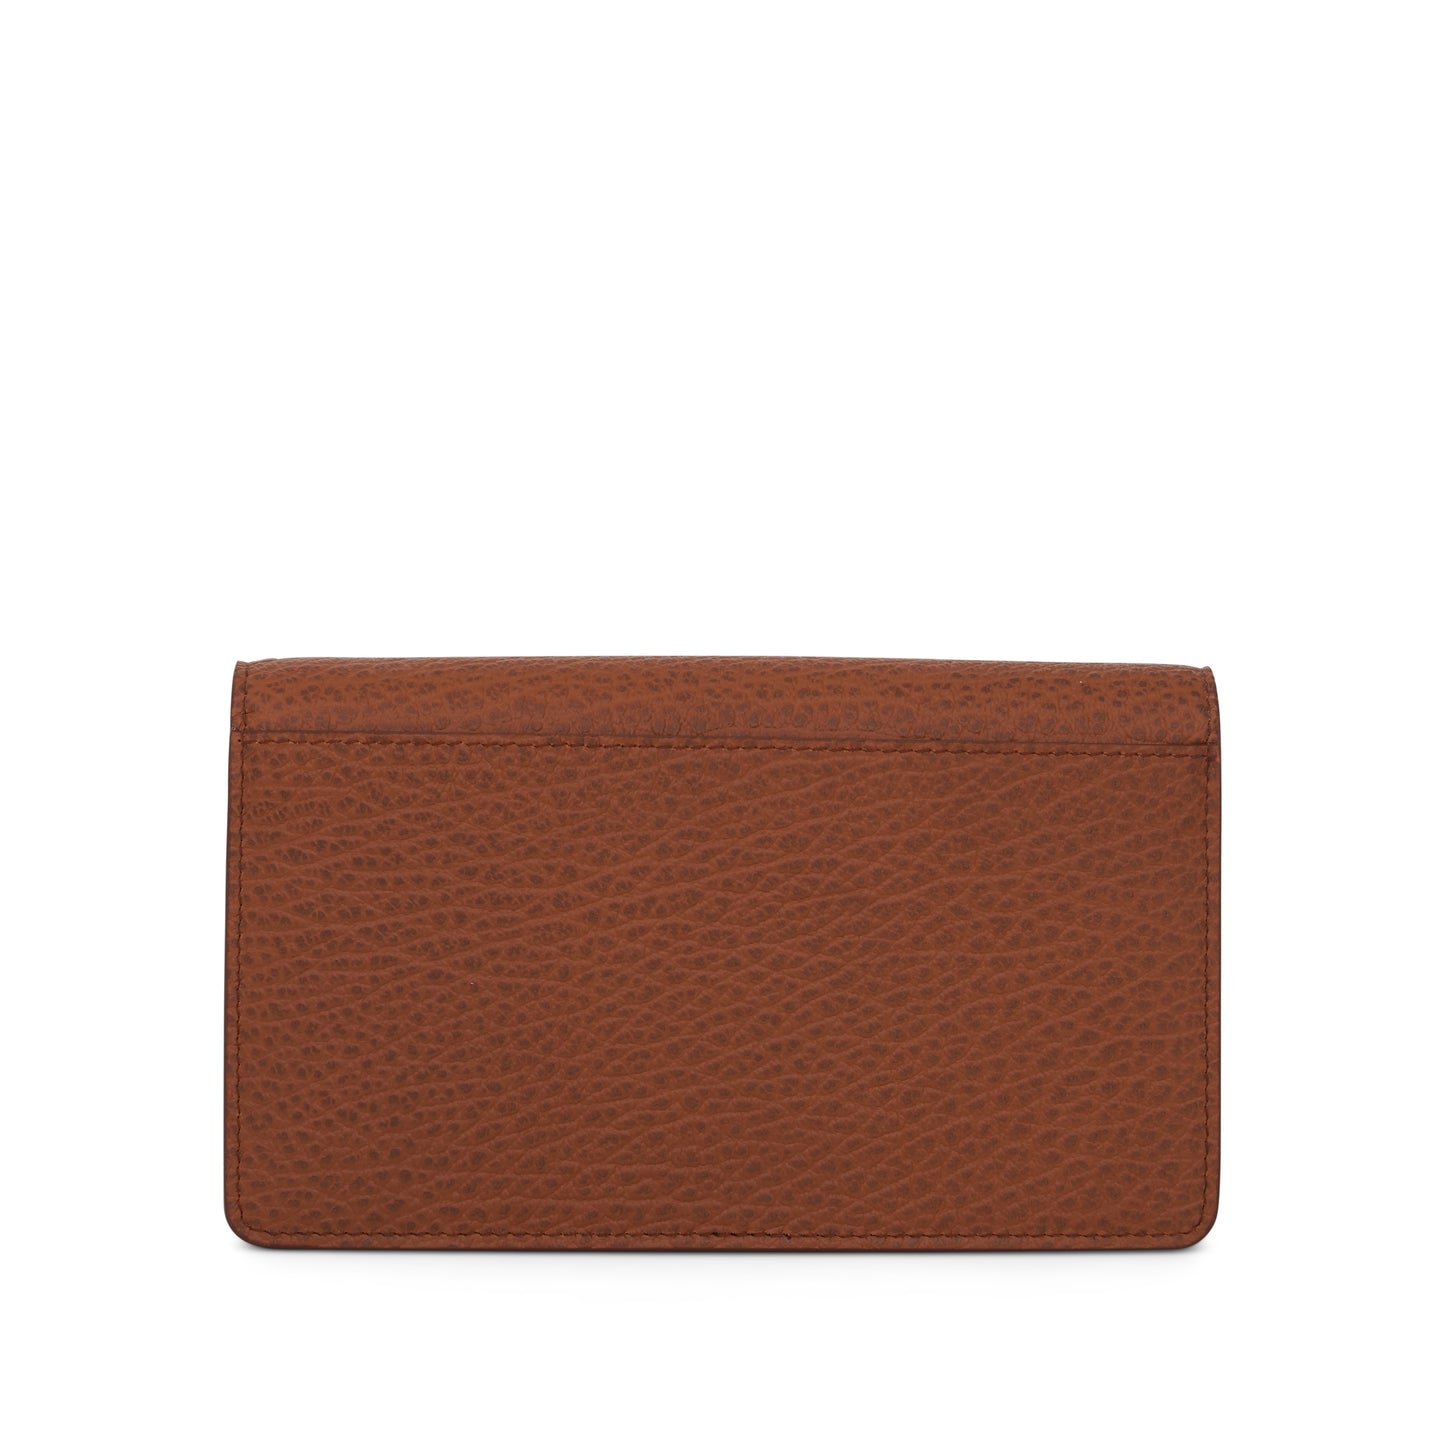 Four Stitches Chain Wallet in Toffee